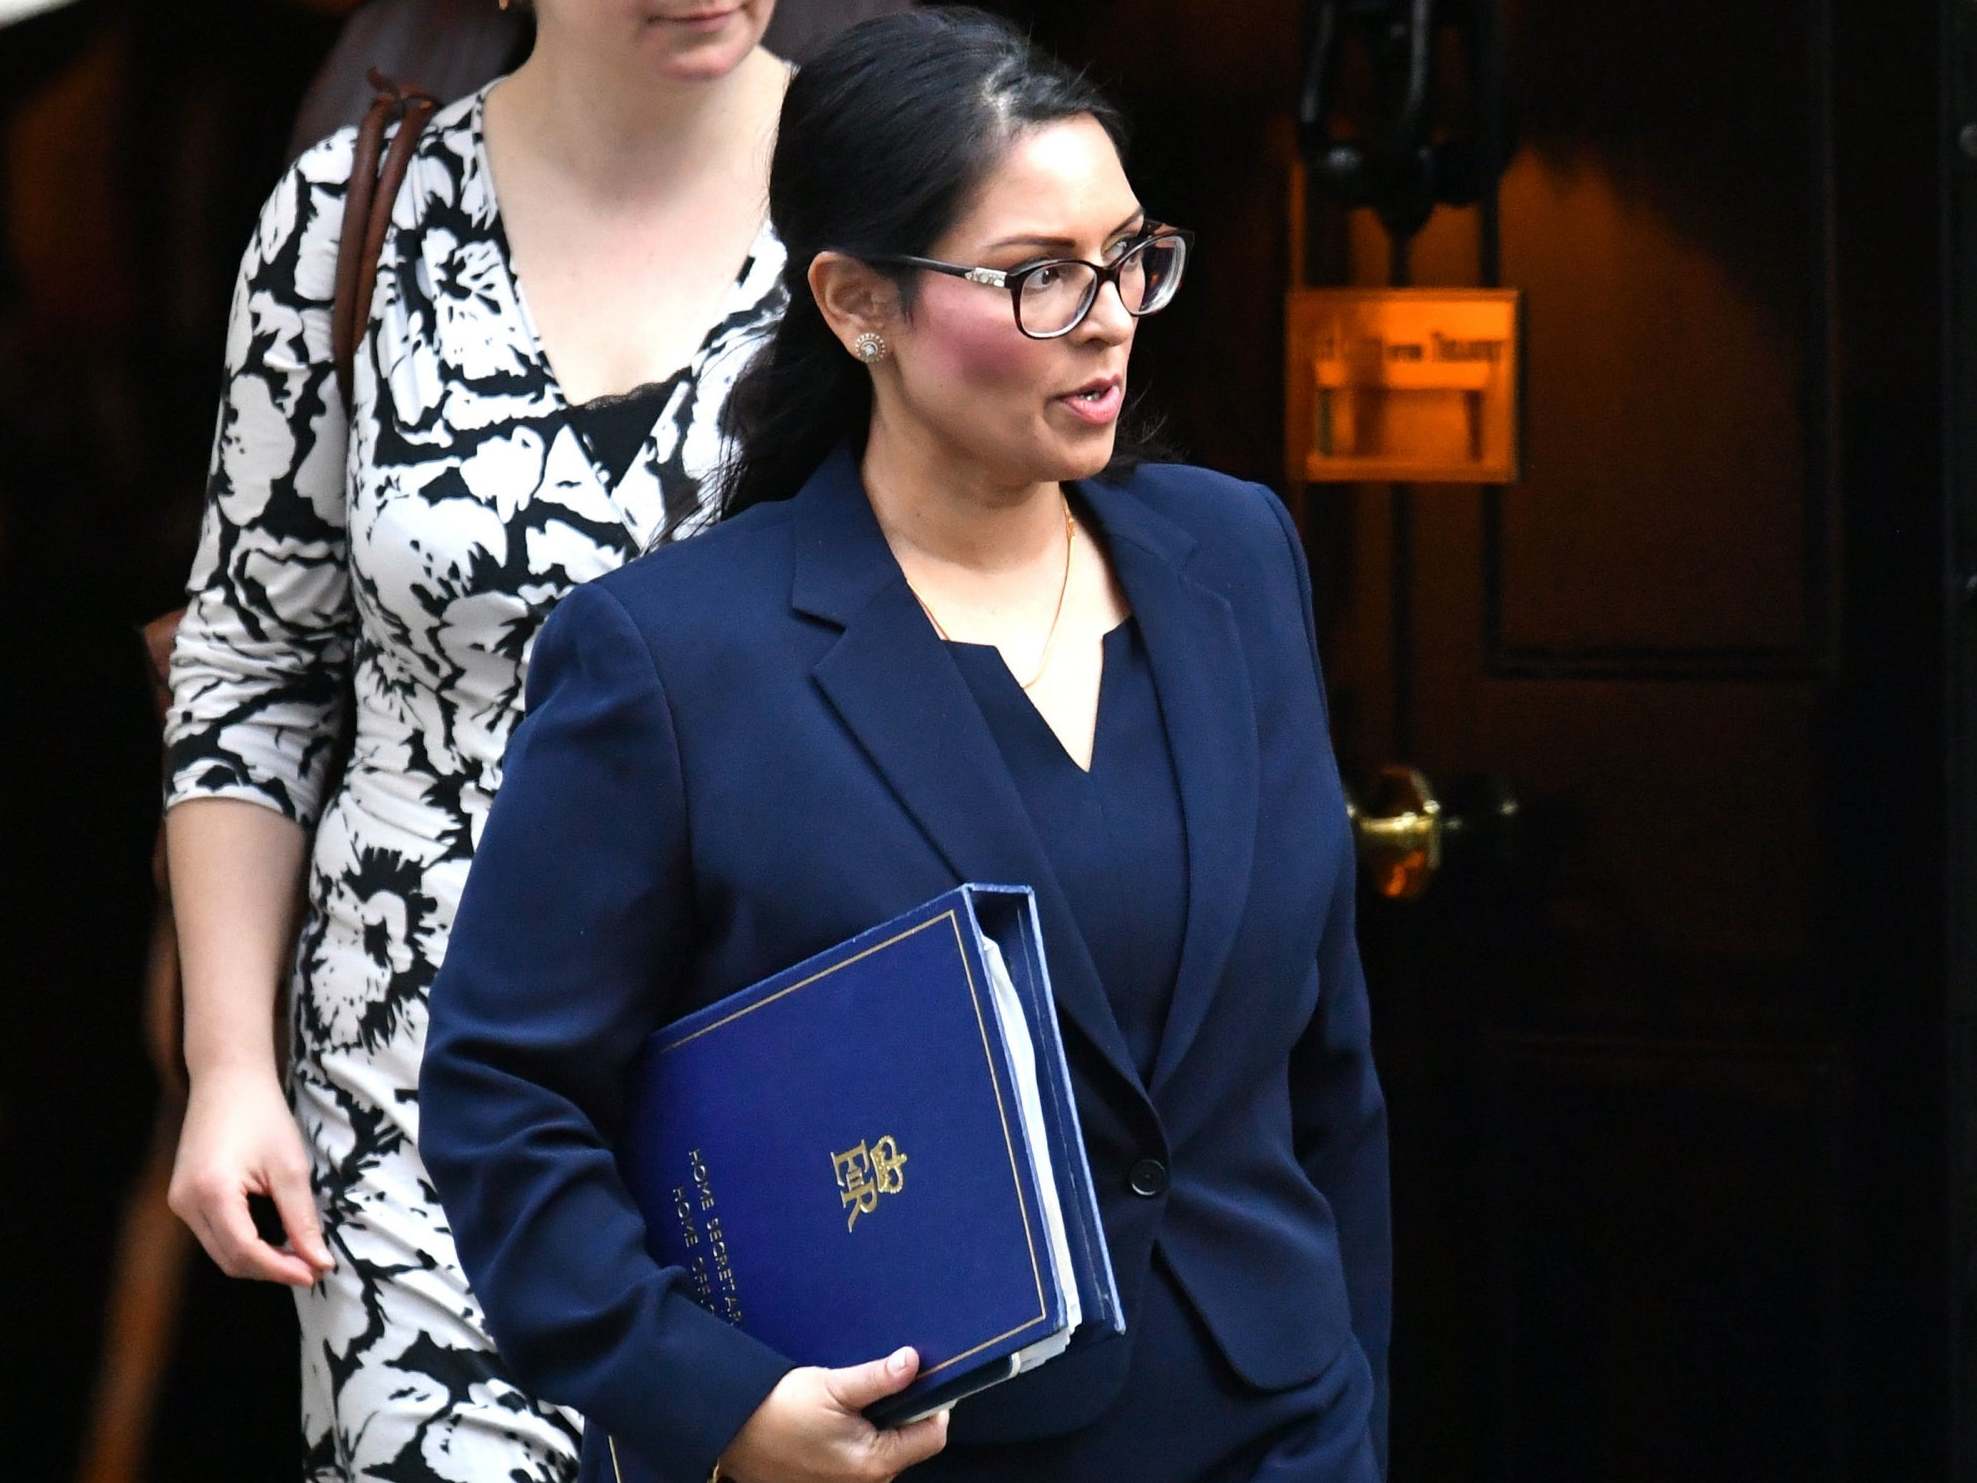 Intelligence chiefs are reported to have withheld information from home secretary Priti Patel